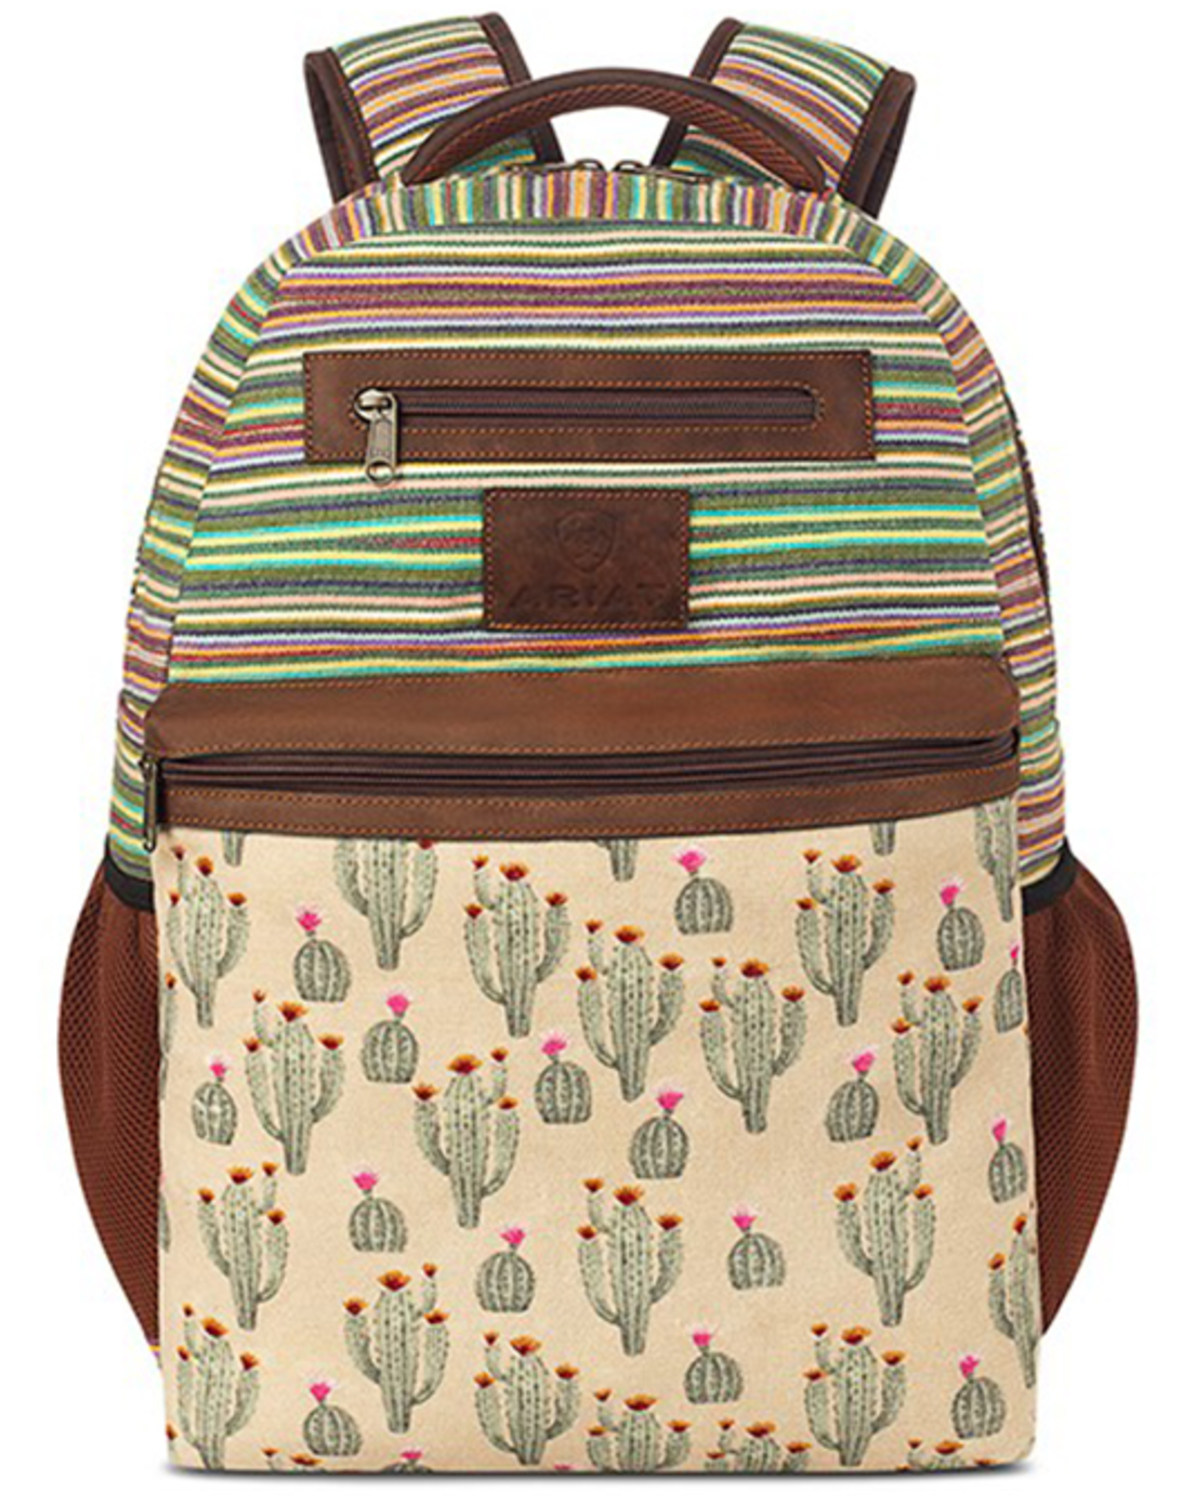 Ariat Women's Boot Barn Exclusive Striped Cactus Backpack